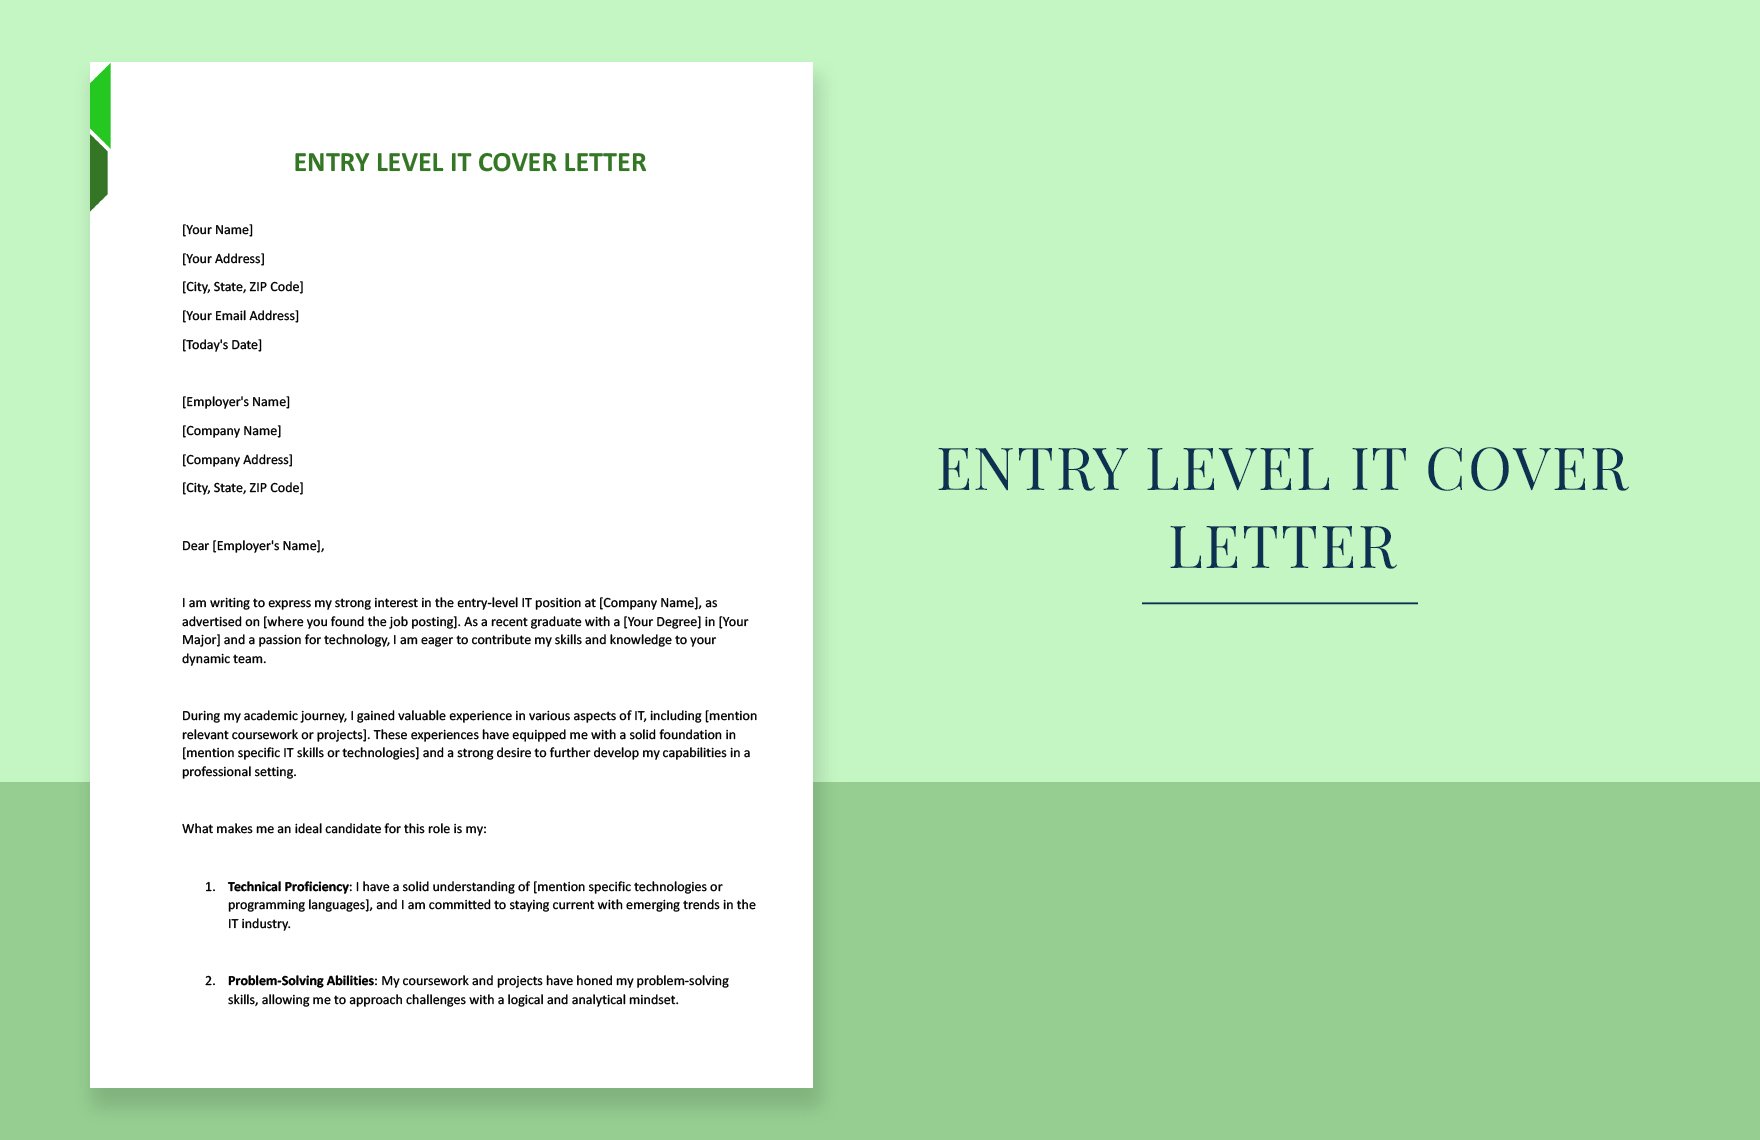 Entry Level IT Cover Letter